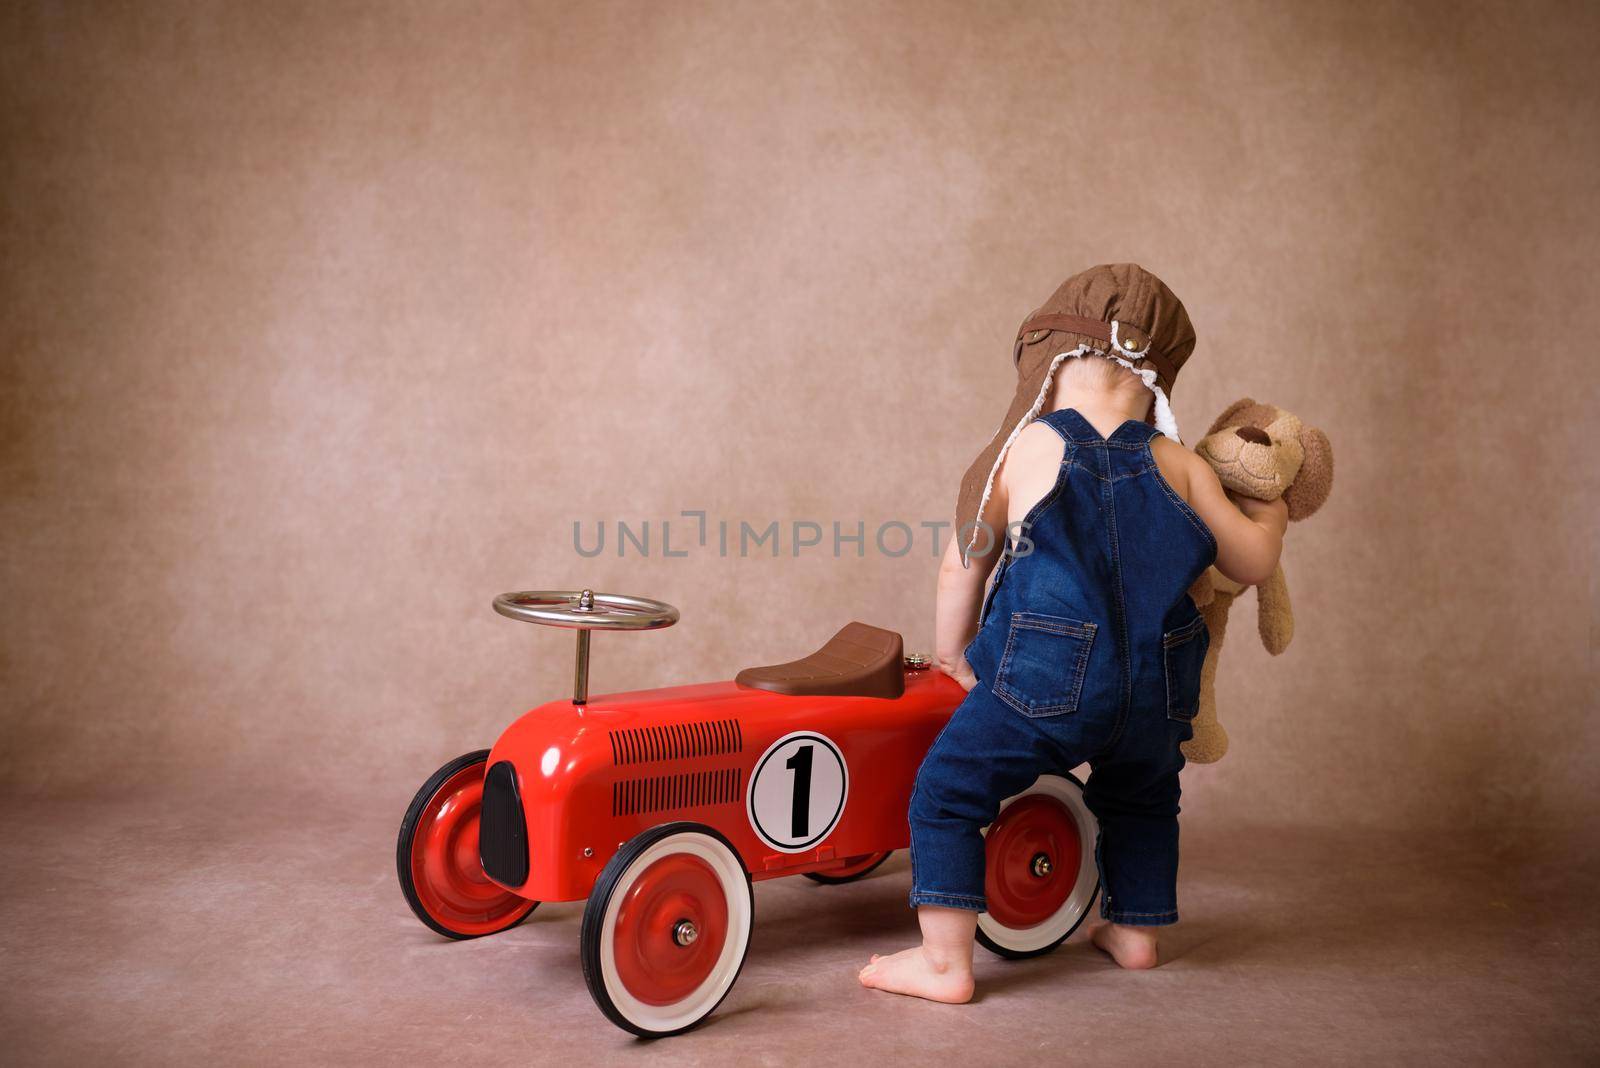 Child riding in red car. Kid holding Christmas bag. Xmas holiday concept by jcdiazhidalgo